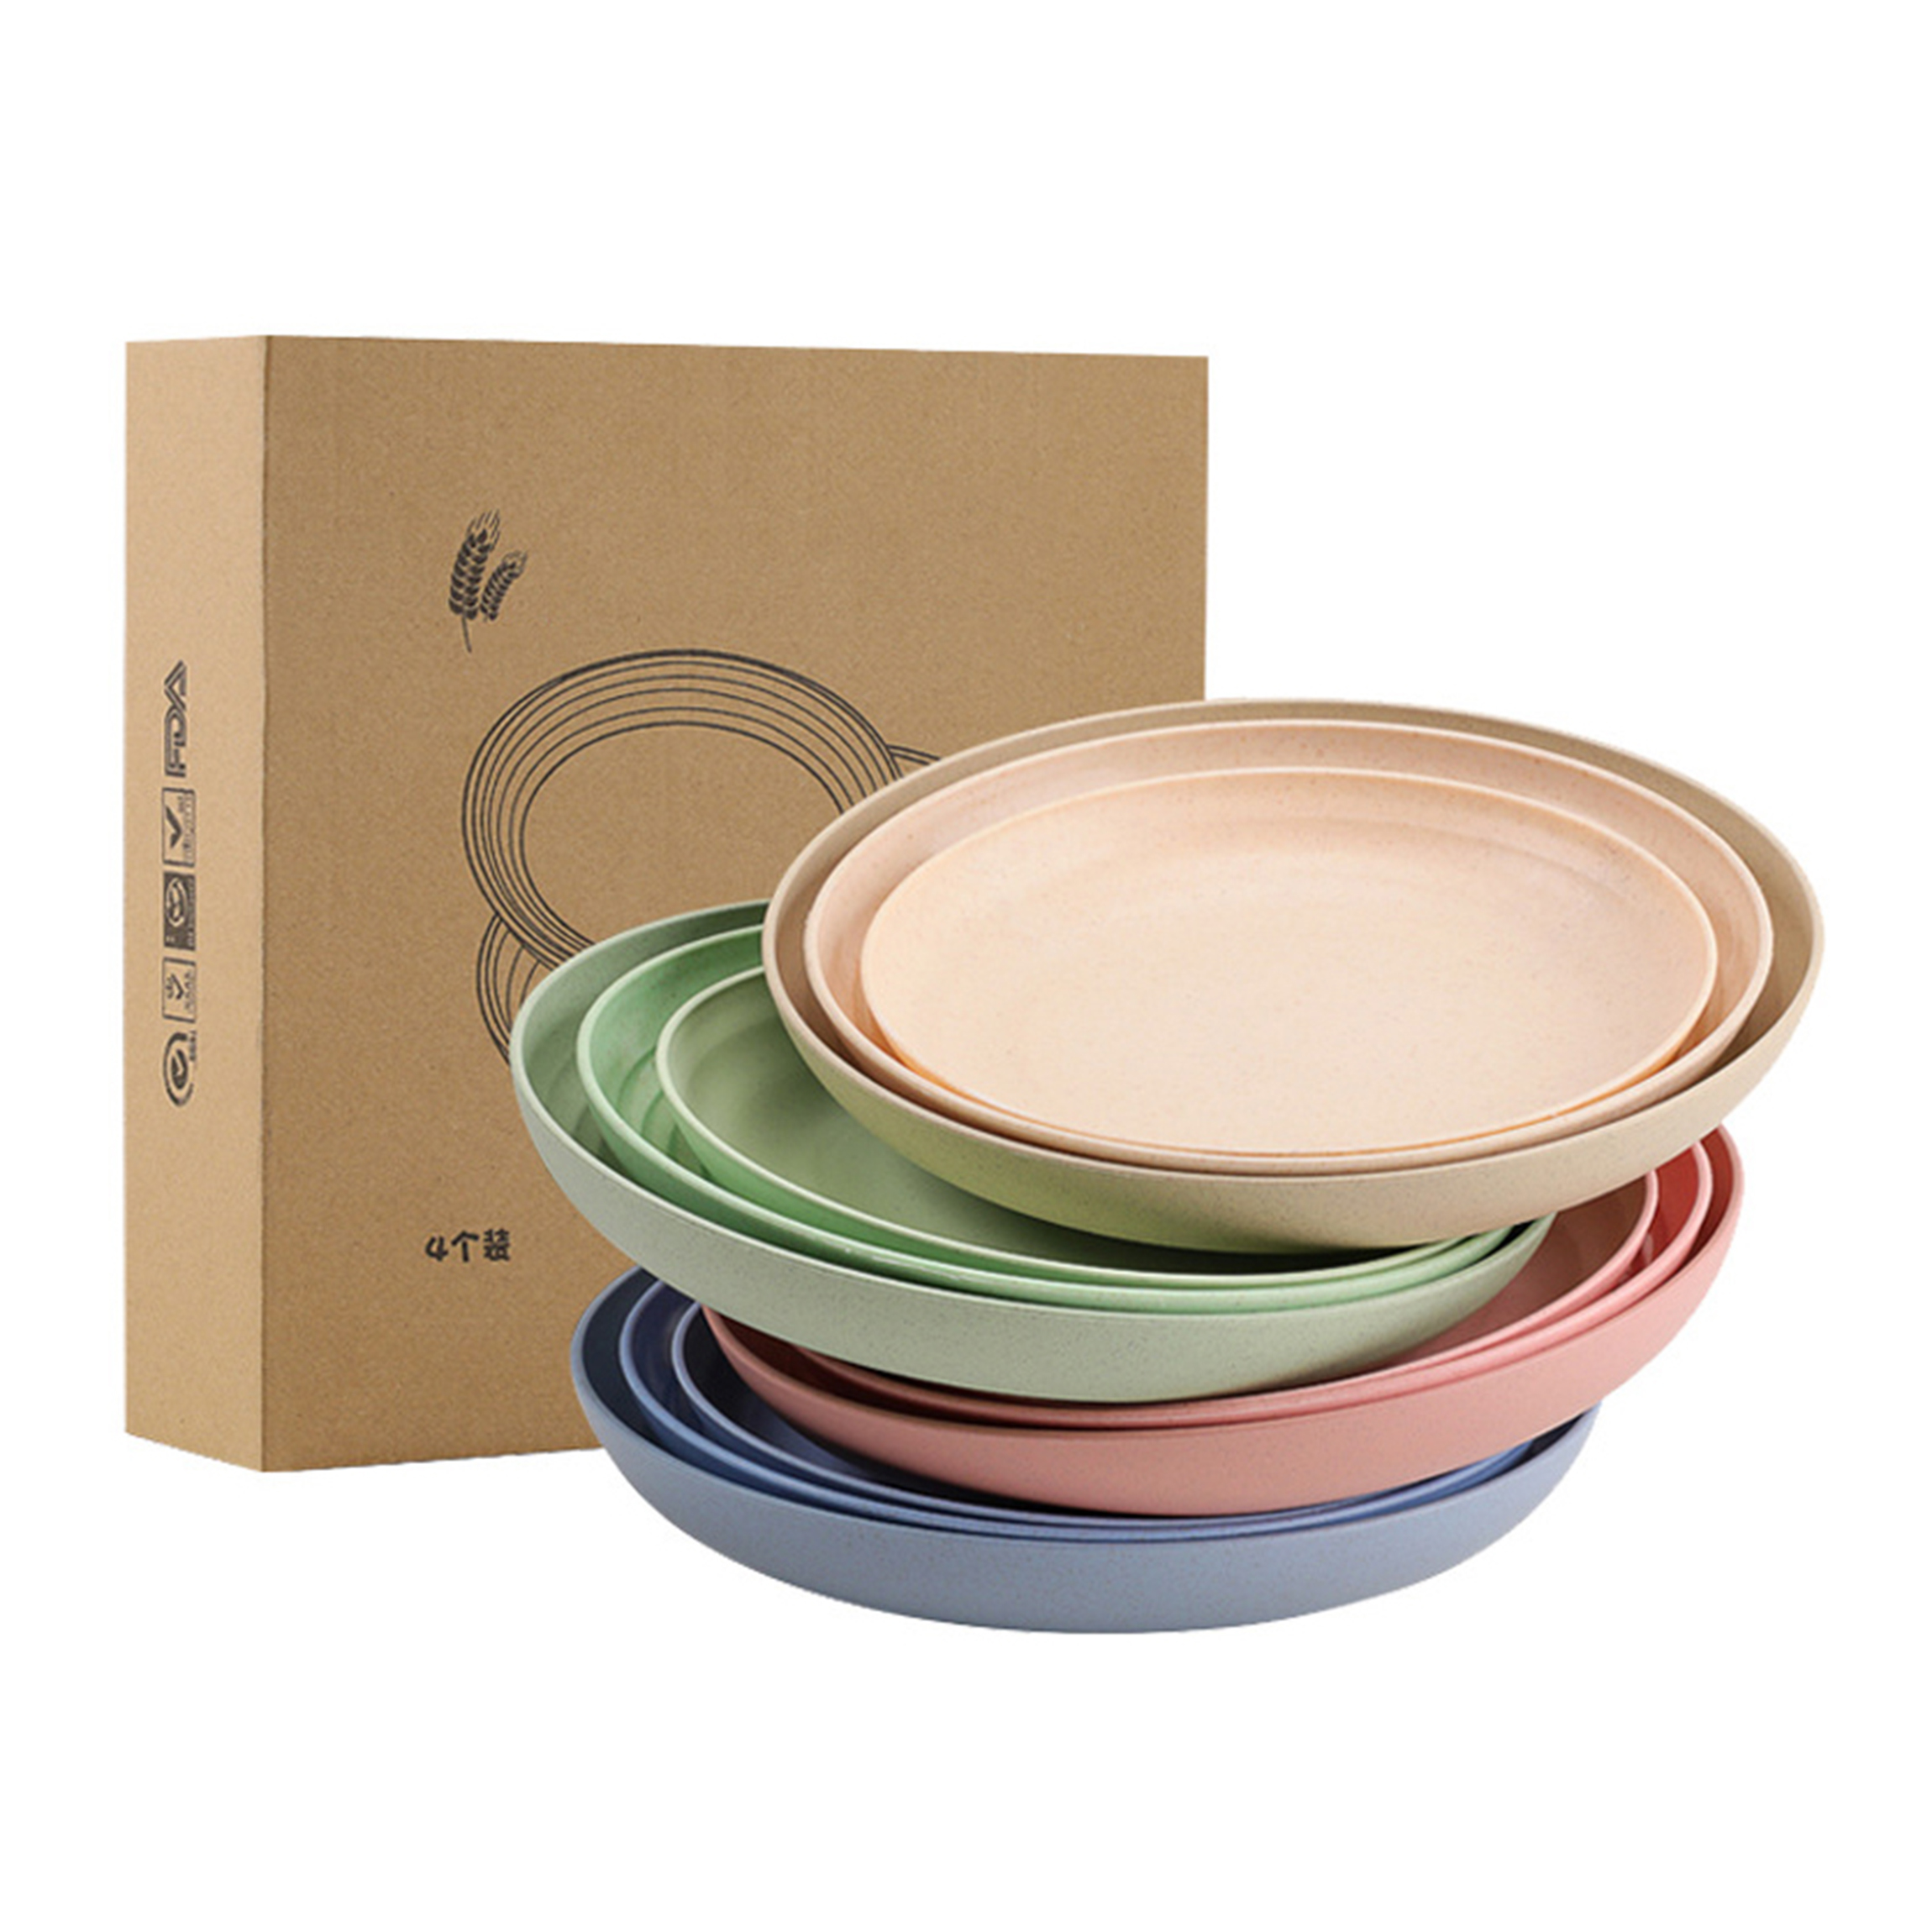 Premium Quality Biodegradable Disposable Plates, Straws, Cups & more!